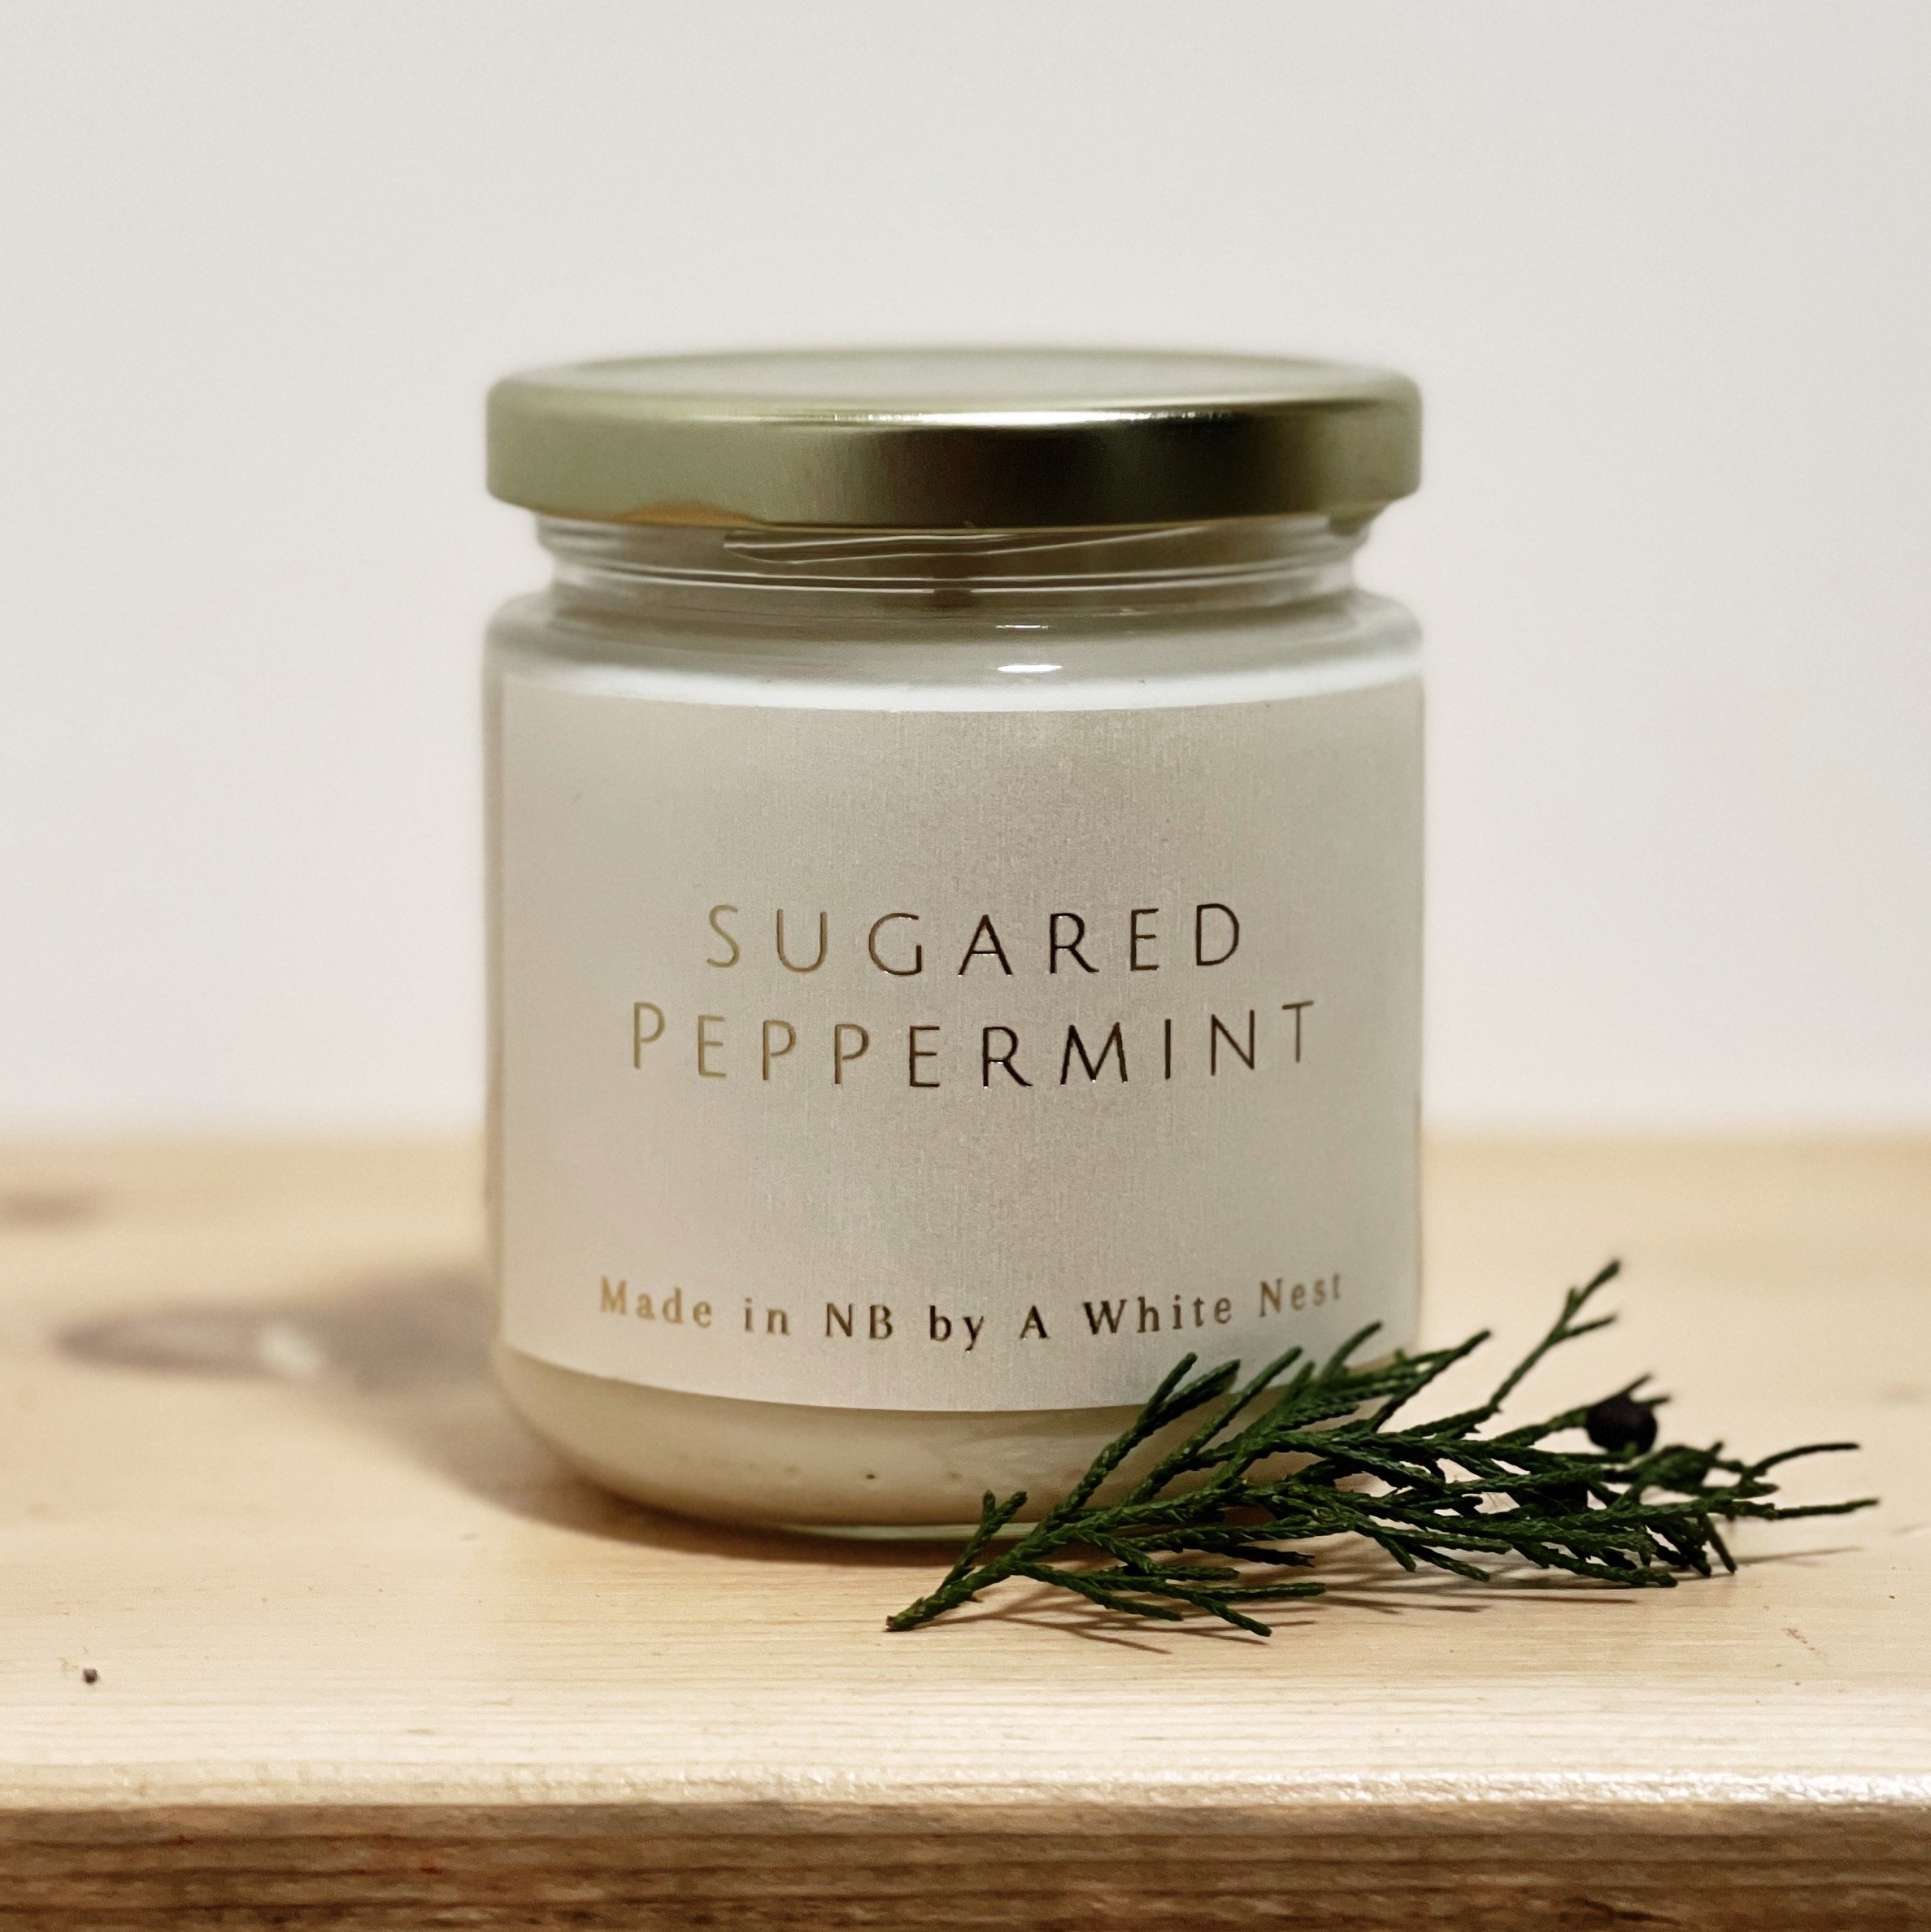 Sugared Peppermint Candle - $20.00